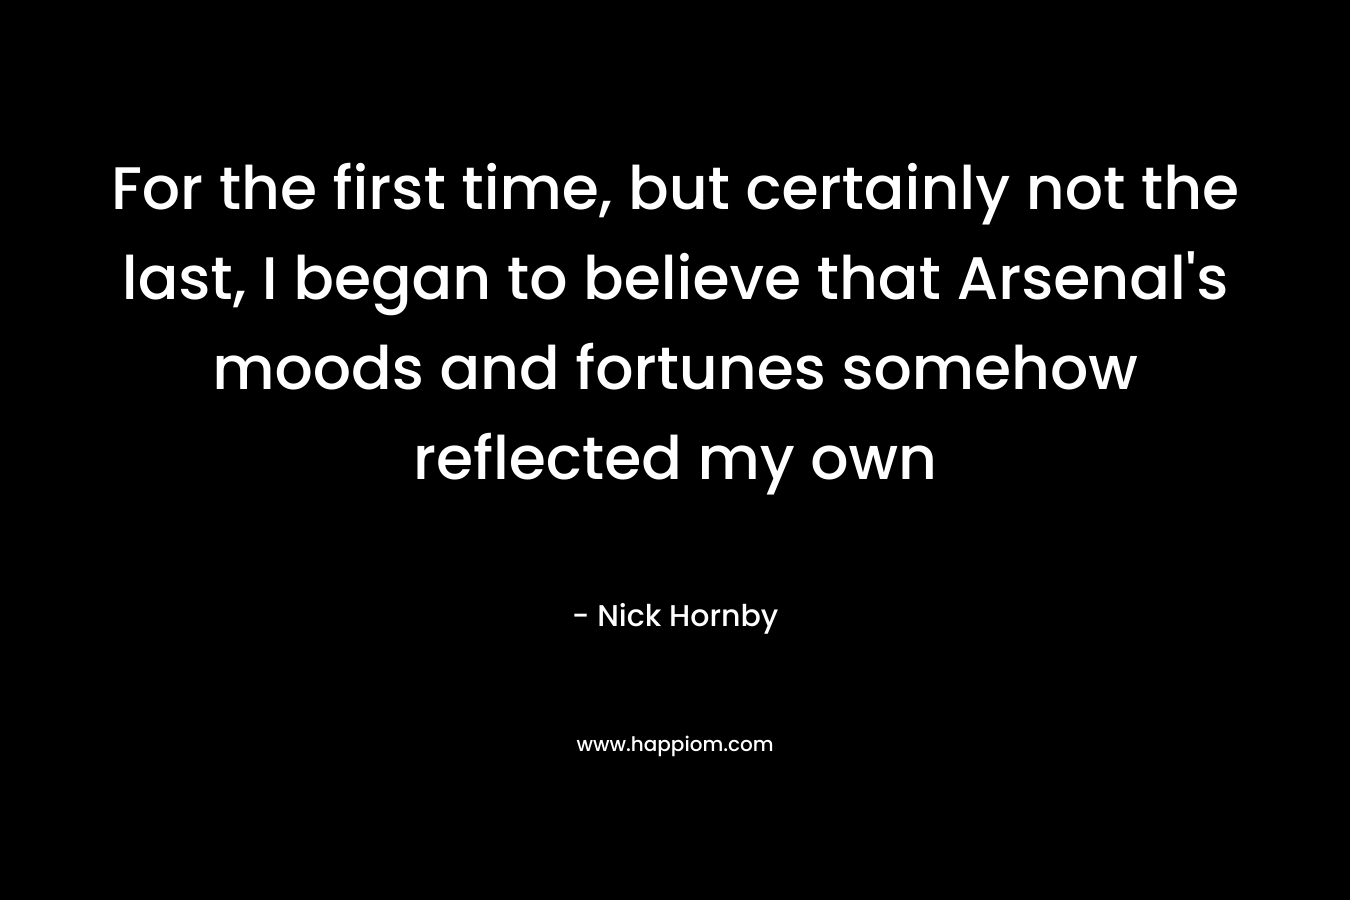 For the first time, but certainly not the last, I began to believe that Arsenal’s moods and fortunes somehow reflected my own – Nick Hornby